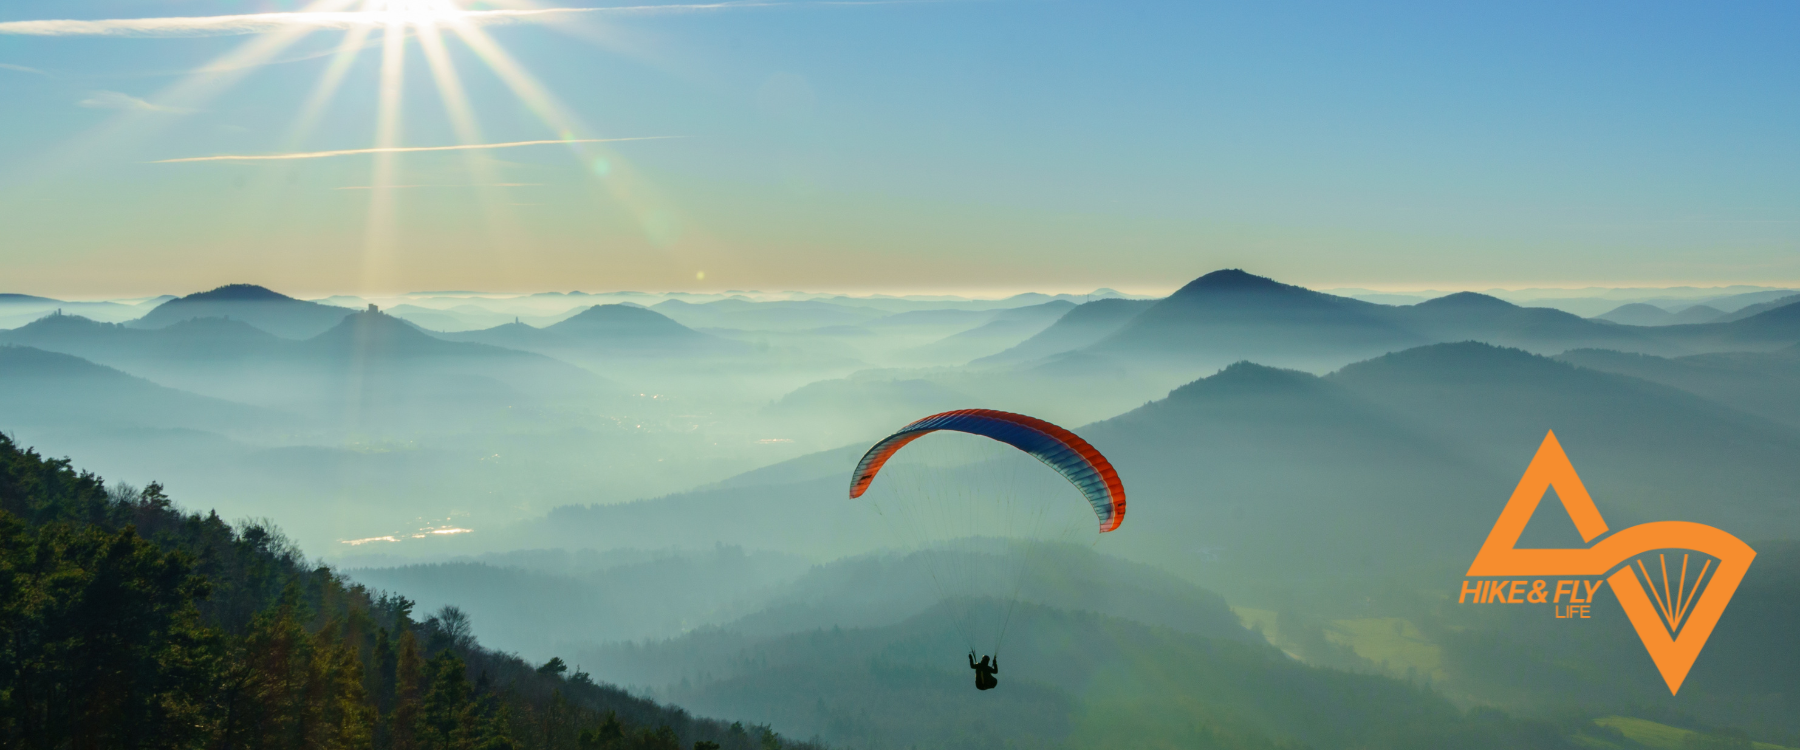 Image of a Hike & Fly participant, paragliding, misty mountains and clear skies in the background. In the bottom right corner is an orange logo for Hike & Fly Life.